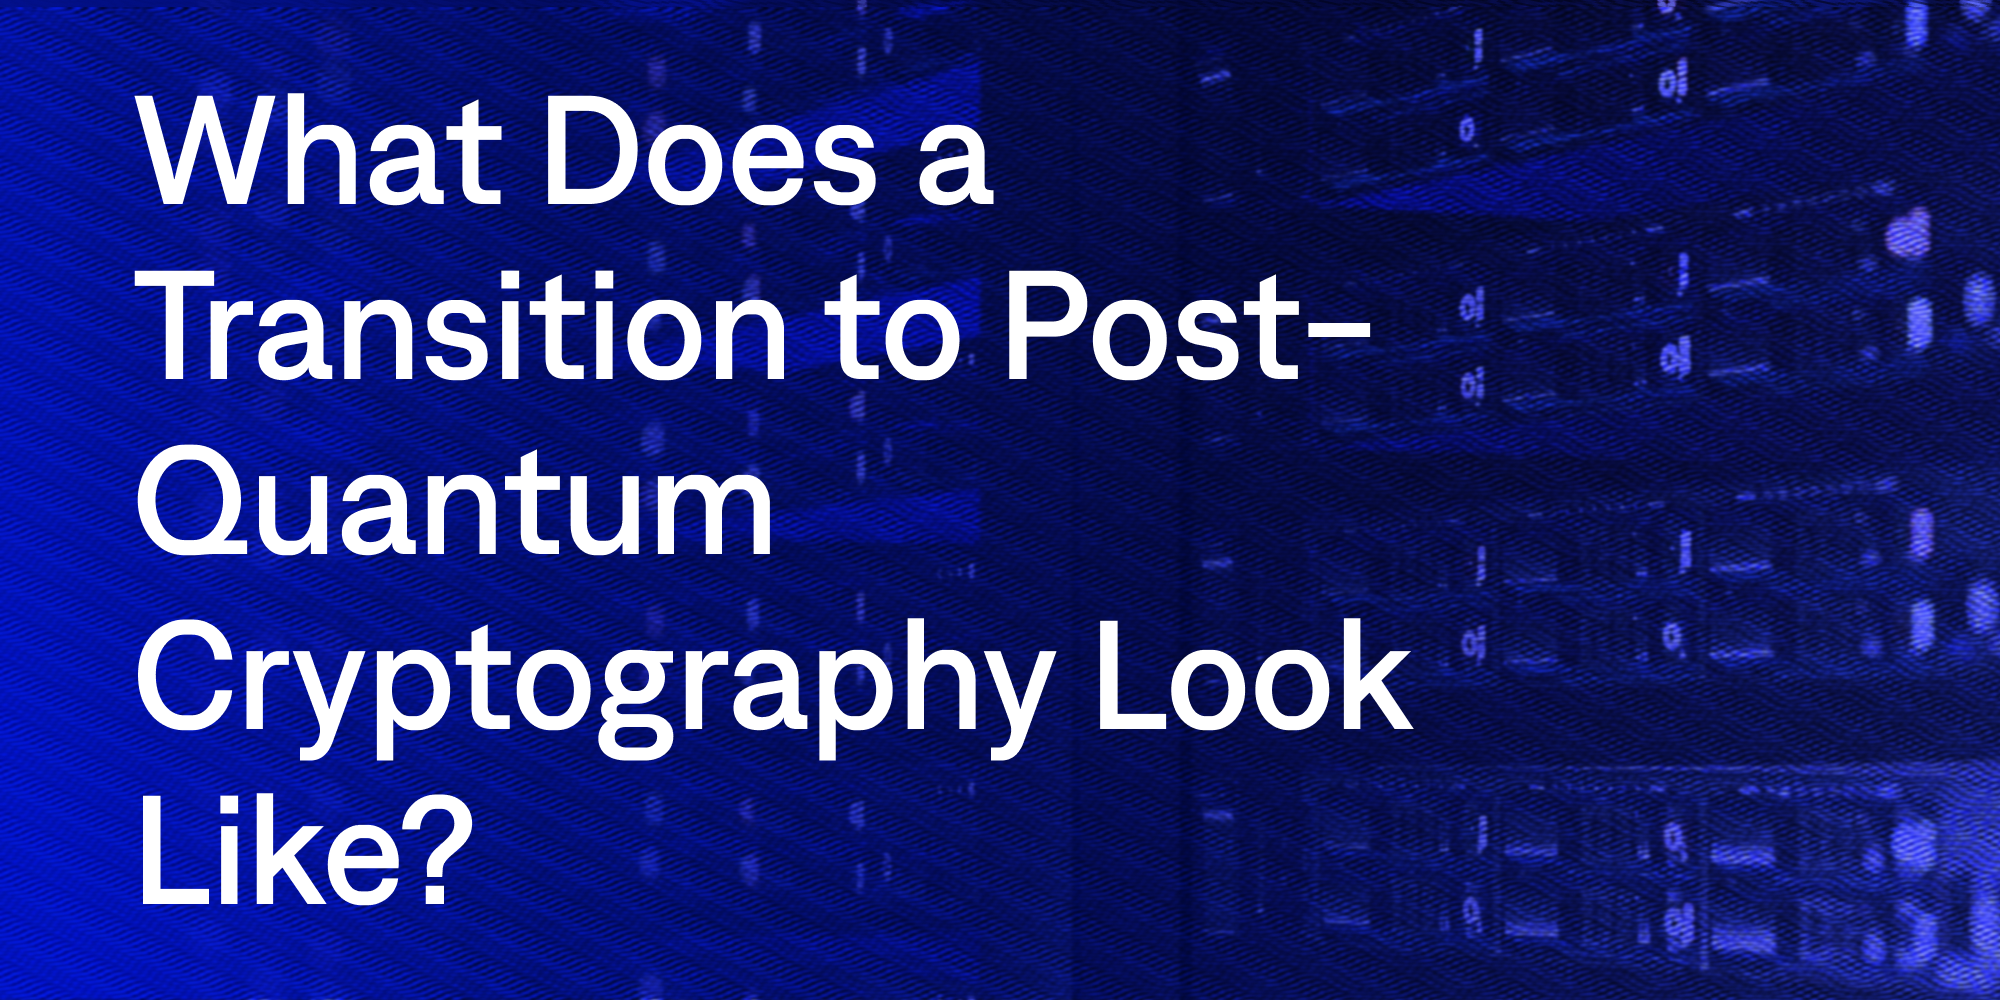 What Does a Transition to Post-Quantum Cryptography Look Like?